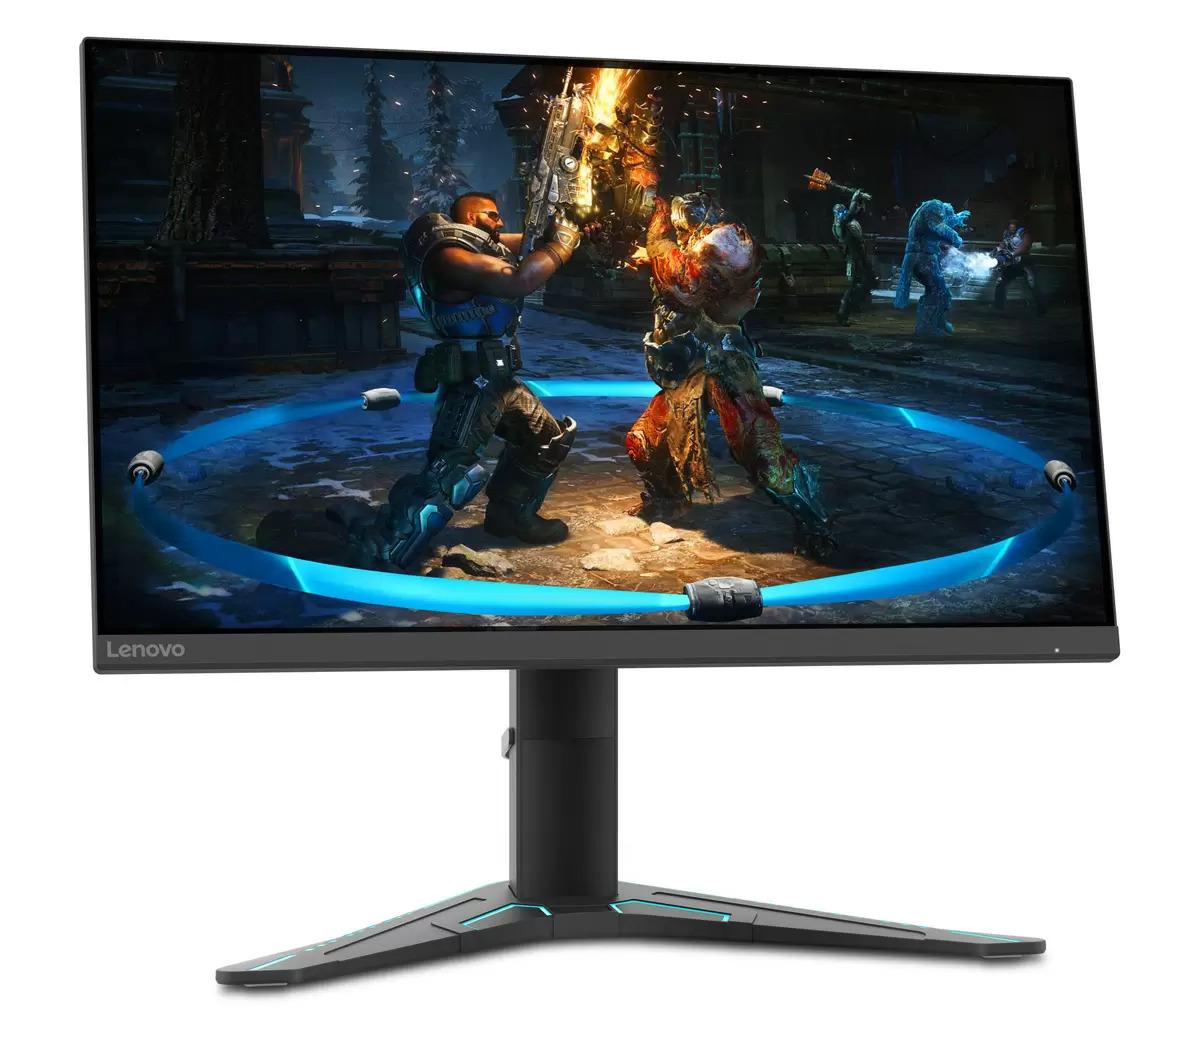 27in Lenovo G27-20 Full HD IPS Gaming LCD Monitor for $109.99 Shipped